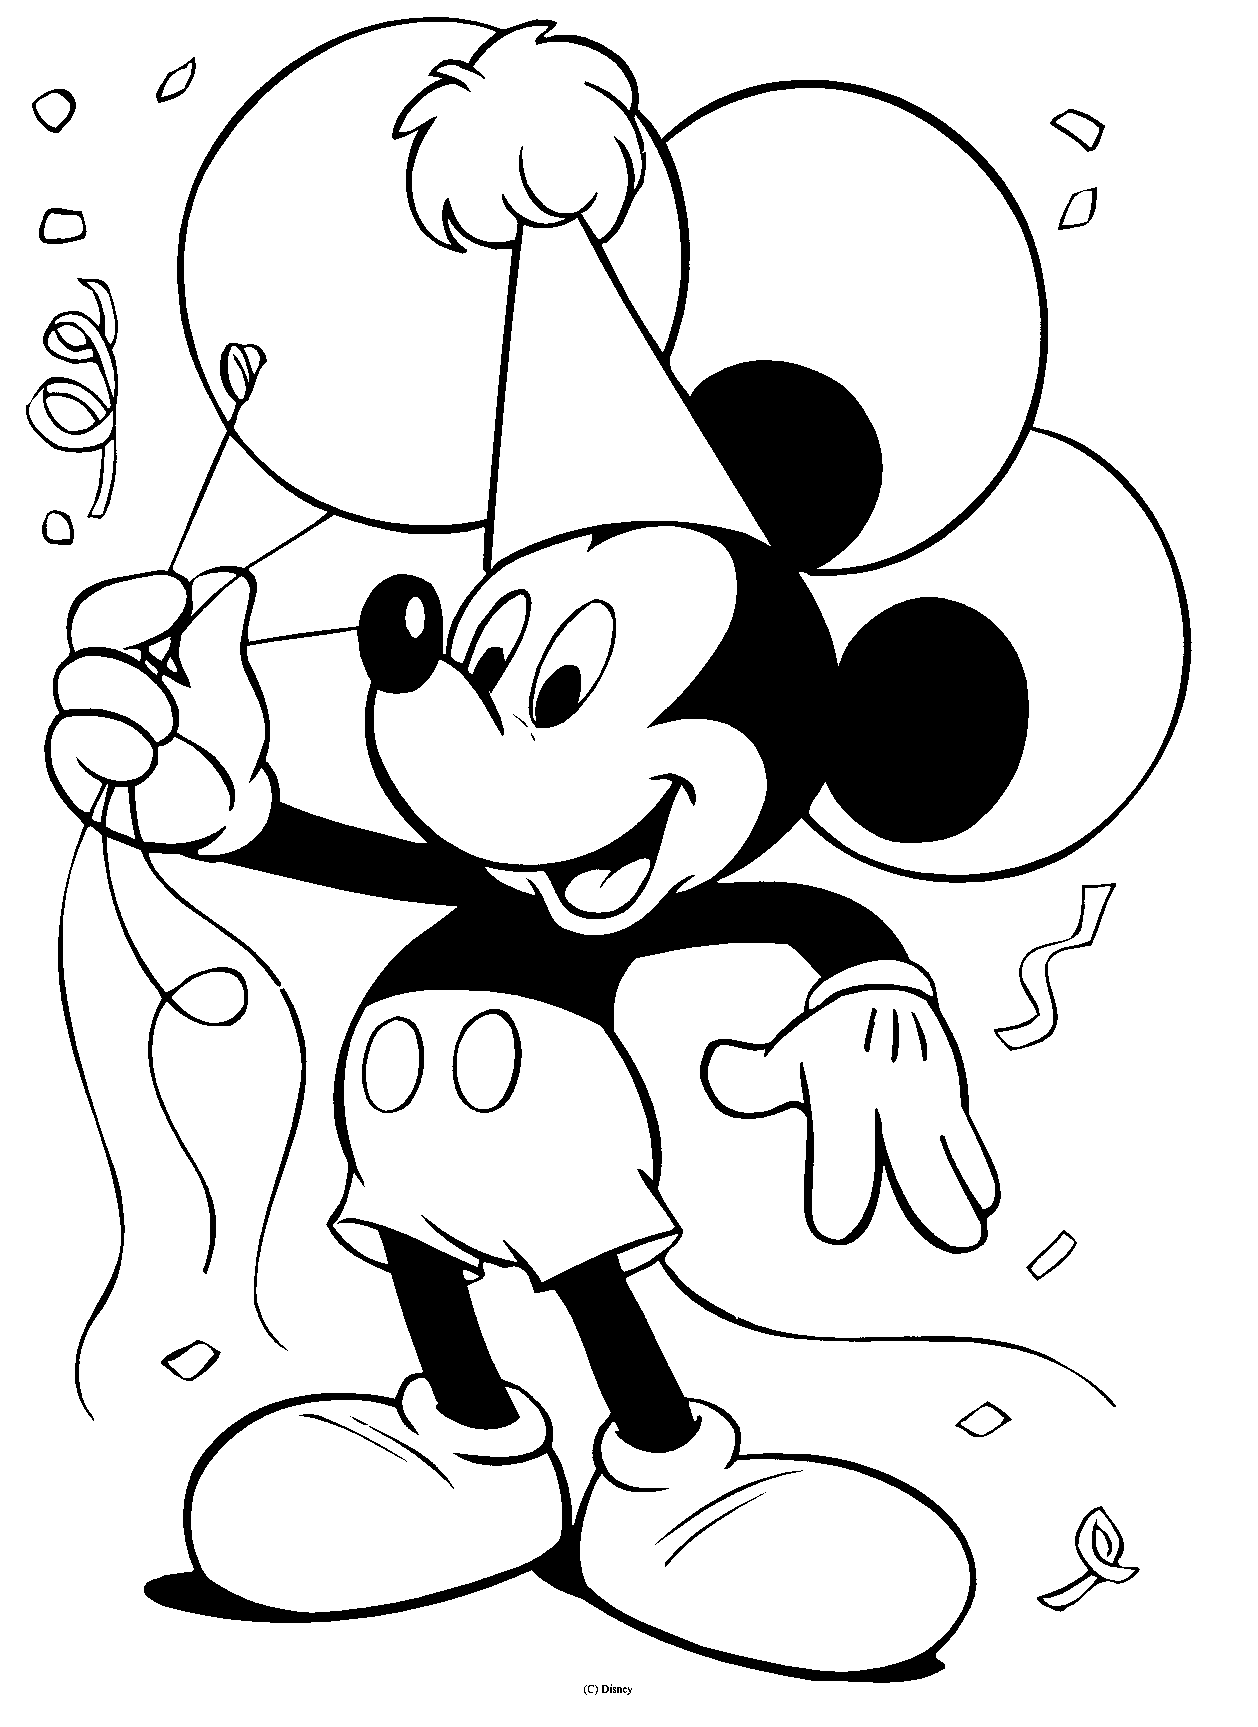 Disney mickey mouse clip art images 6 disney galore image 3